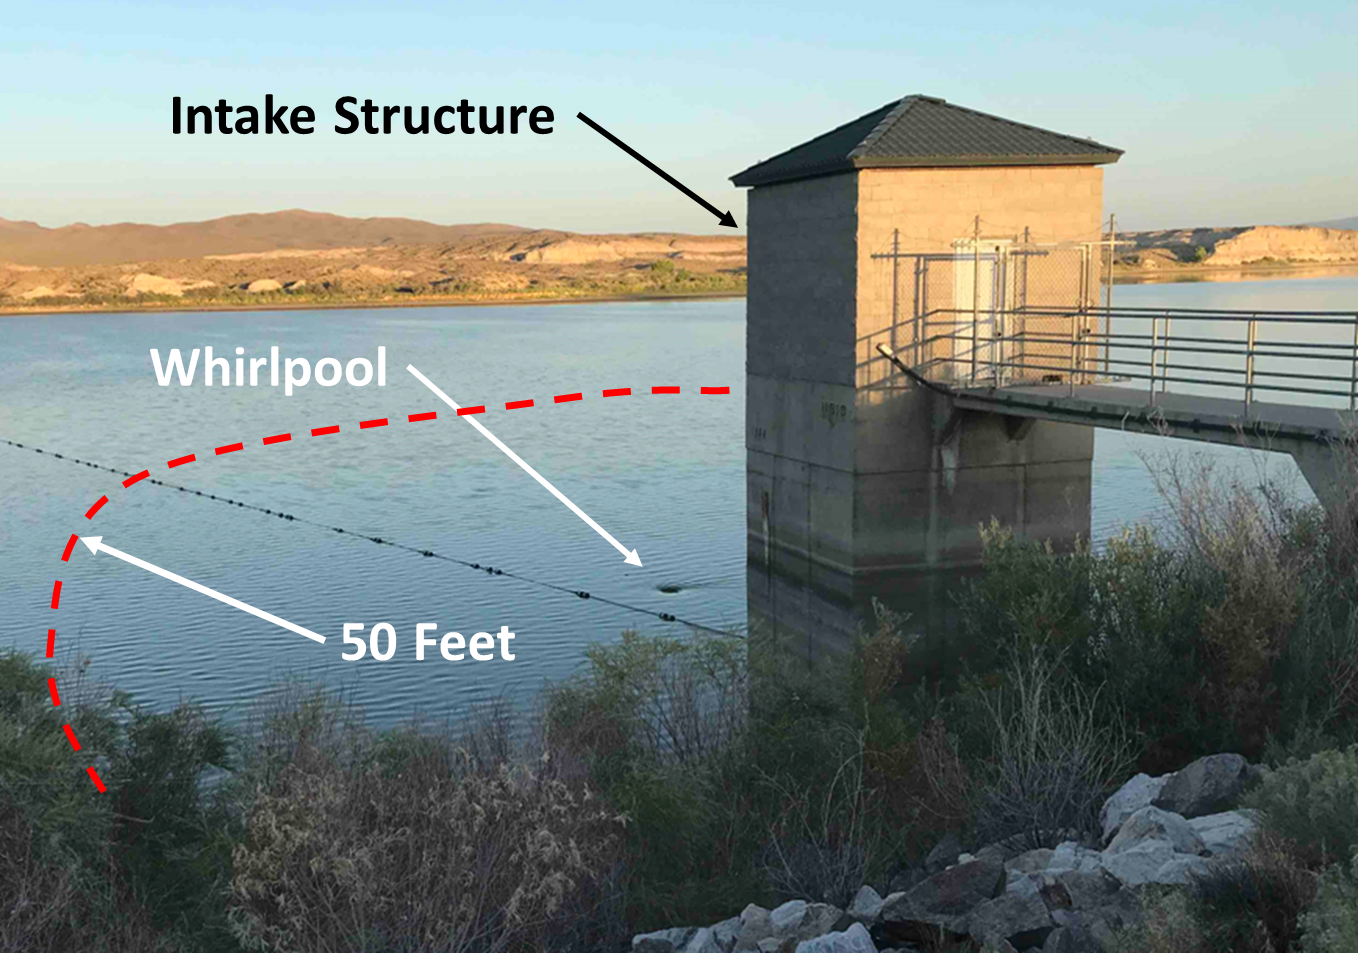 Weber Dam Intake Structure. Recreationalists should stay at least 50 feet from area.